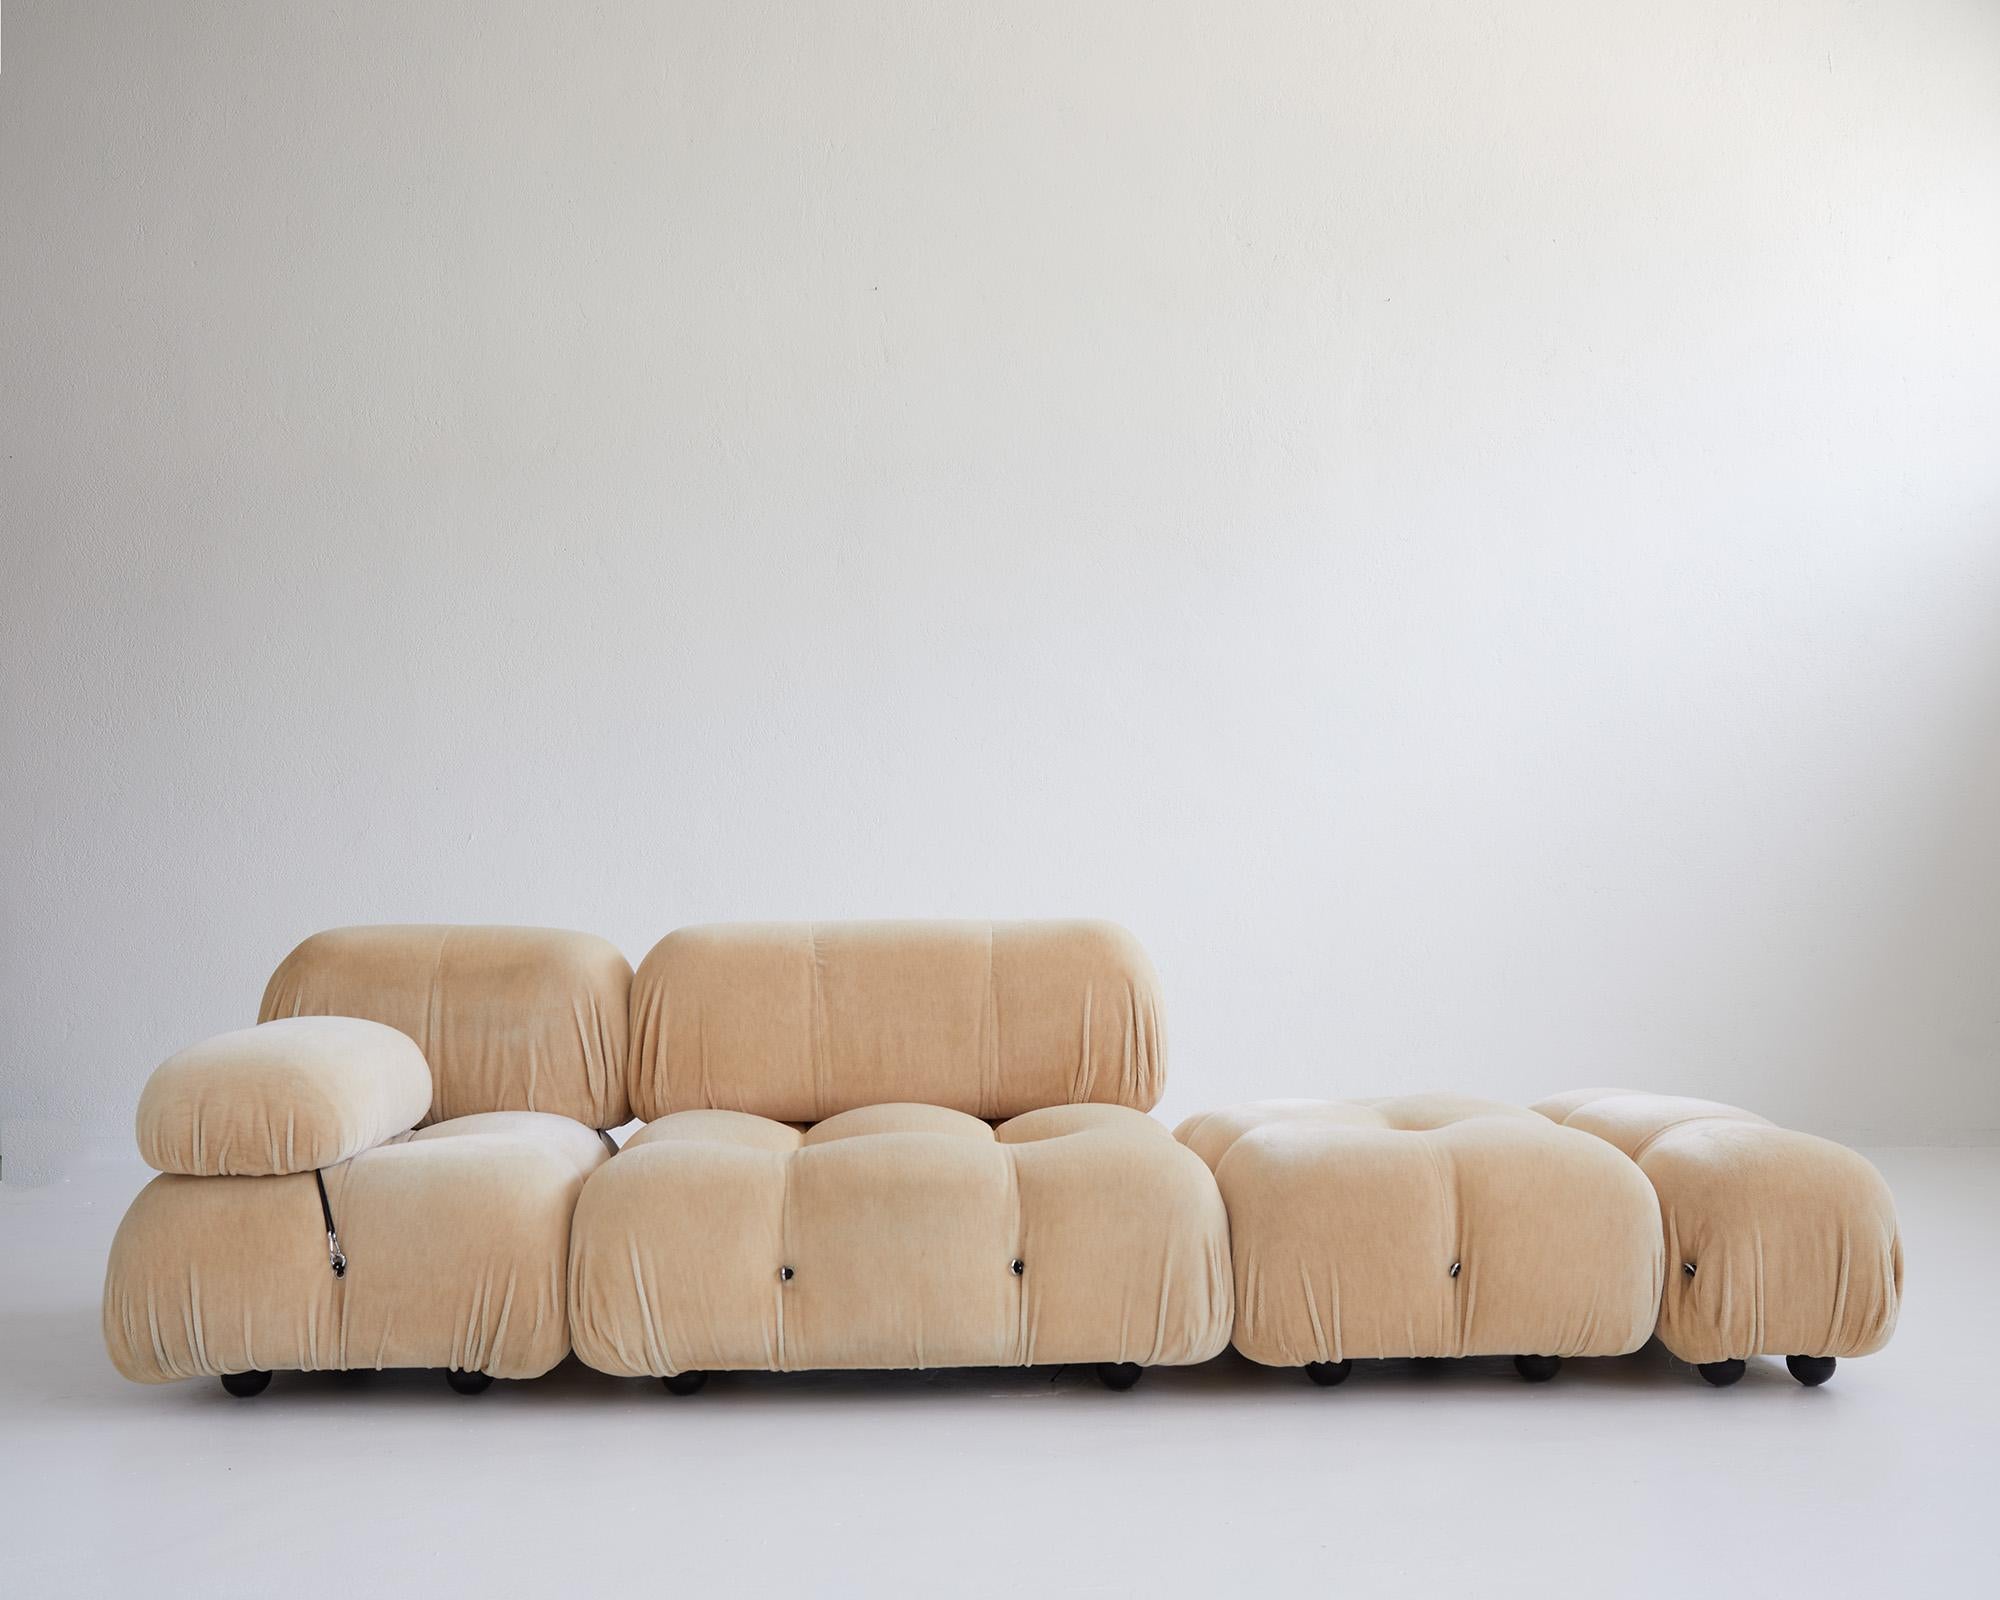 Camaleonda sofa in sand mohair velvet by Mario Bellini for C&B Italia 1970

Composed of one big element, two middle size elements and one small element.

All elements come with their specific headrests and one armrest.

Very rare in this